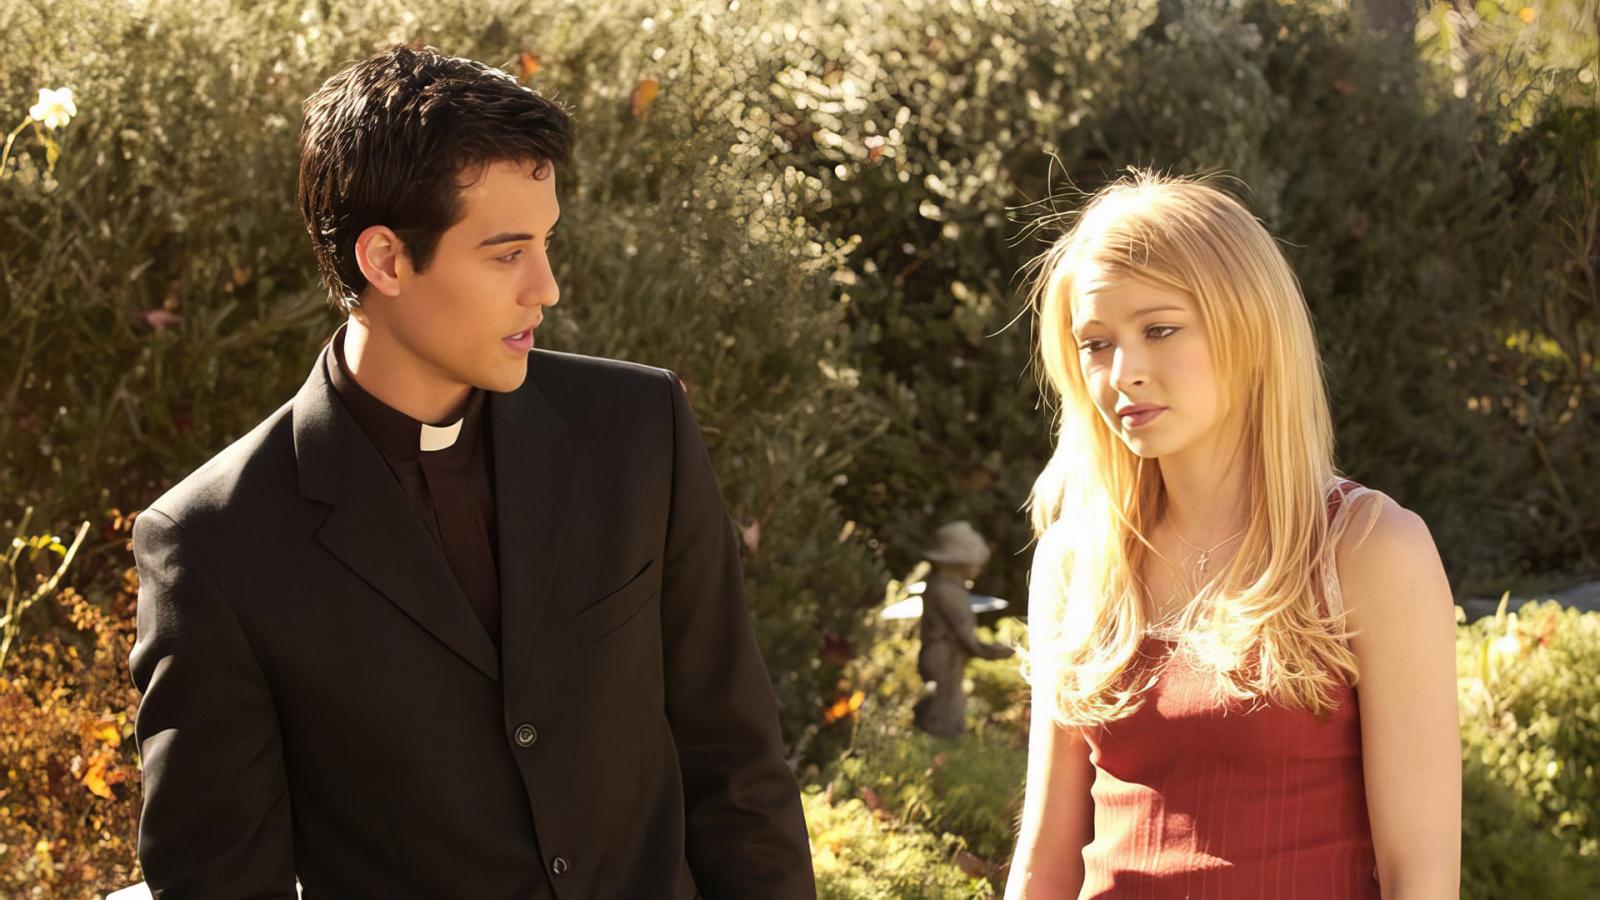 15 Lesser-Known TV Shows to Watch If You Miss Vampire Diaries - image 15